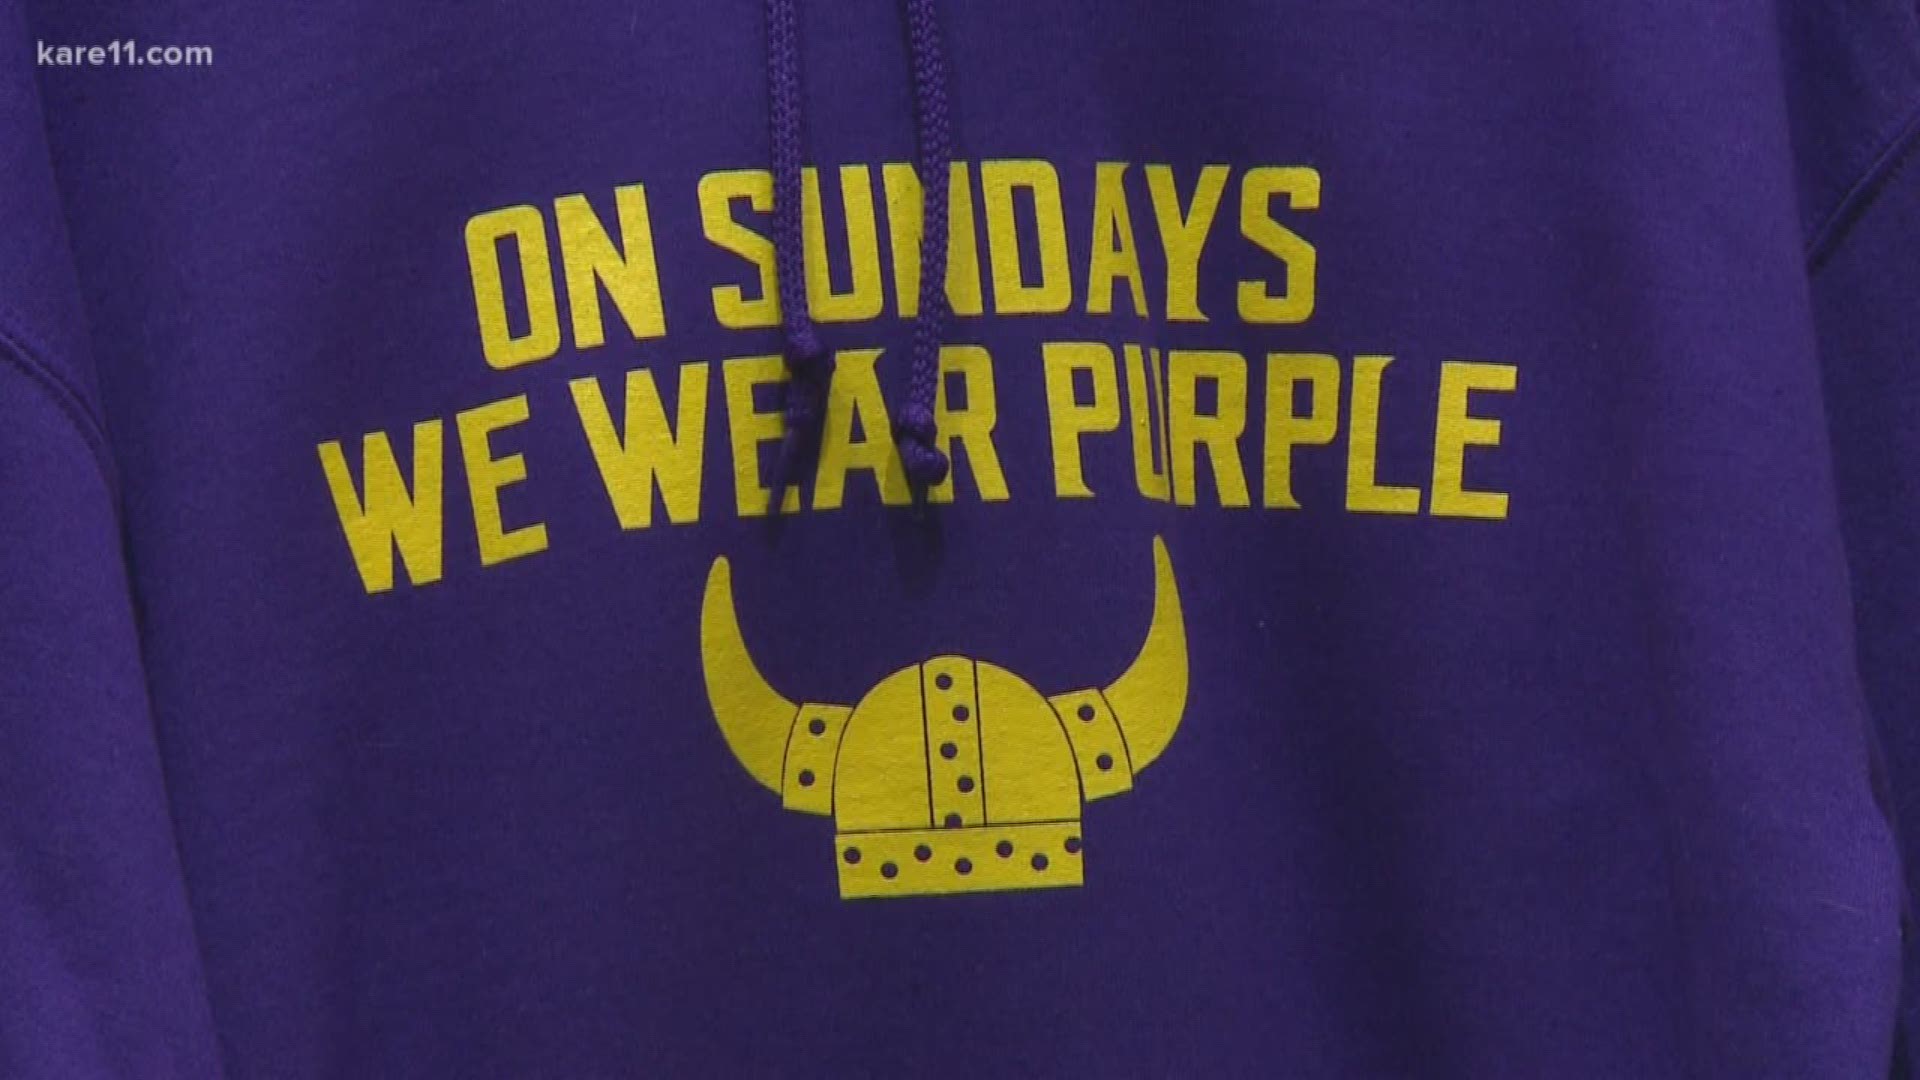 Gordon finds out how Vikings fans are feeling after the loss this weekend against the 49ers.